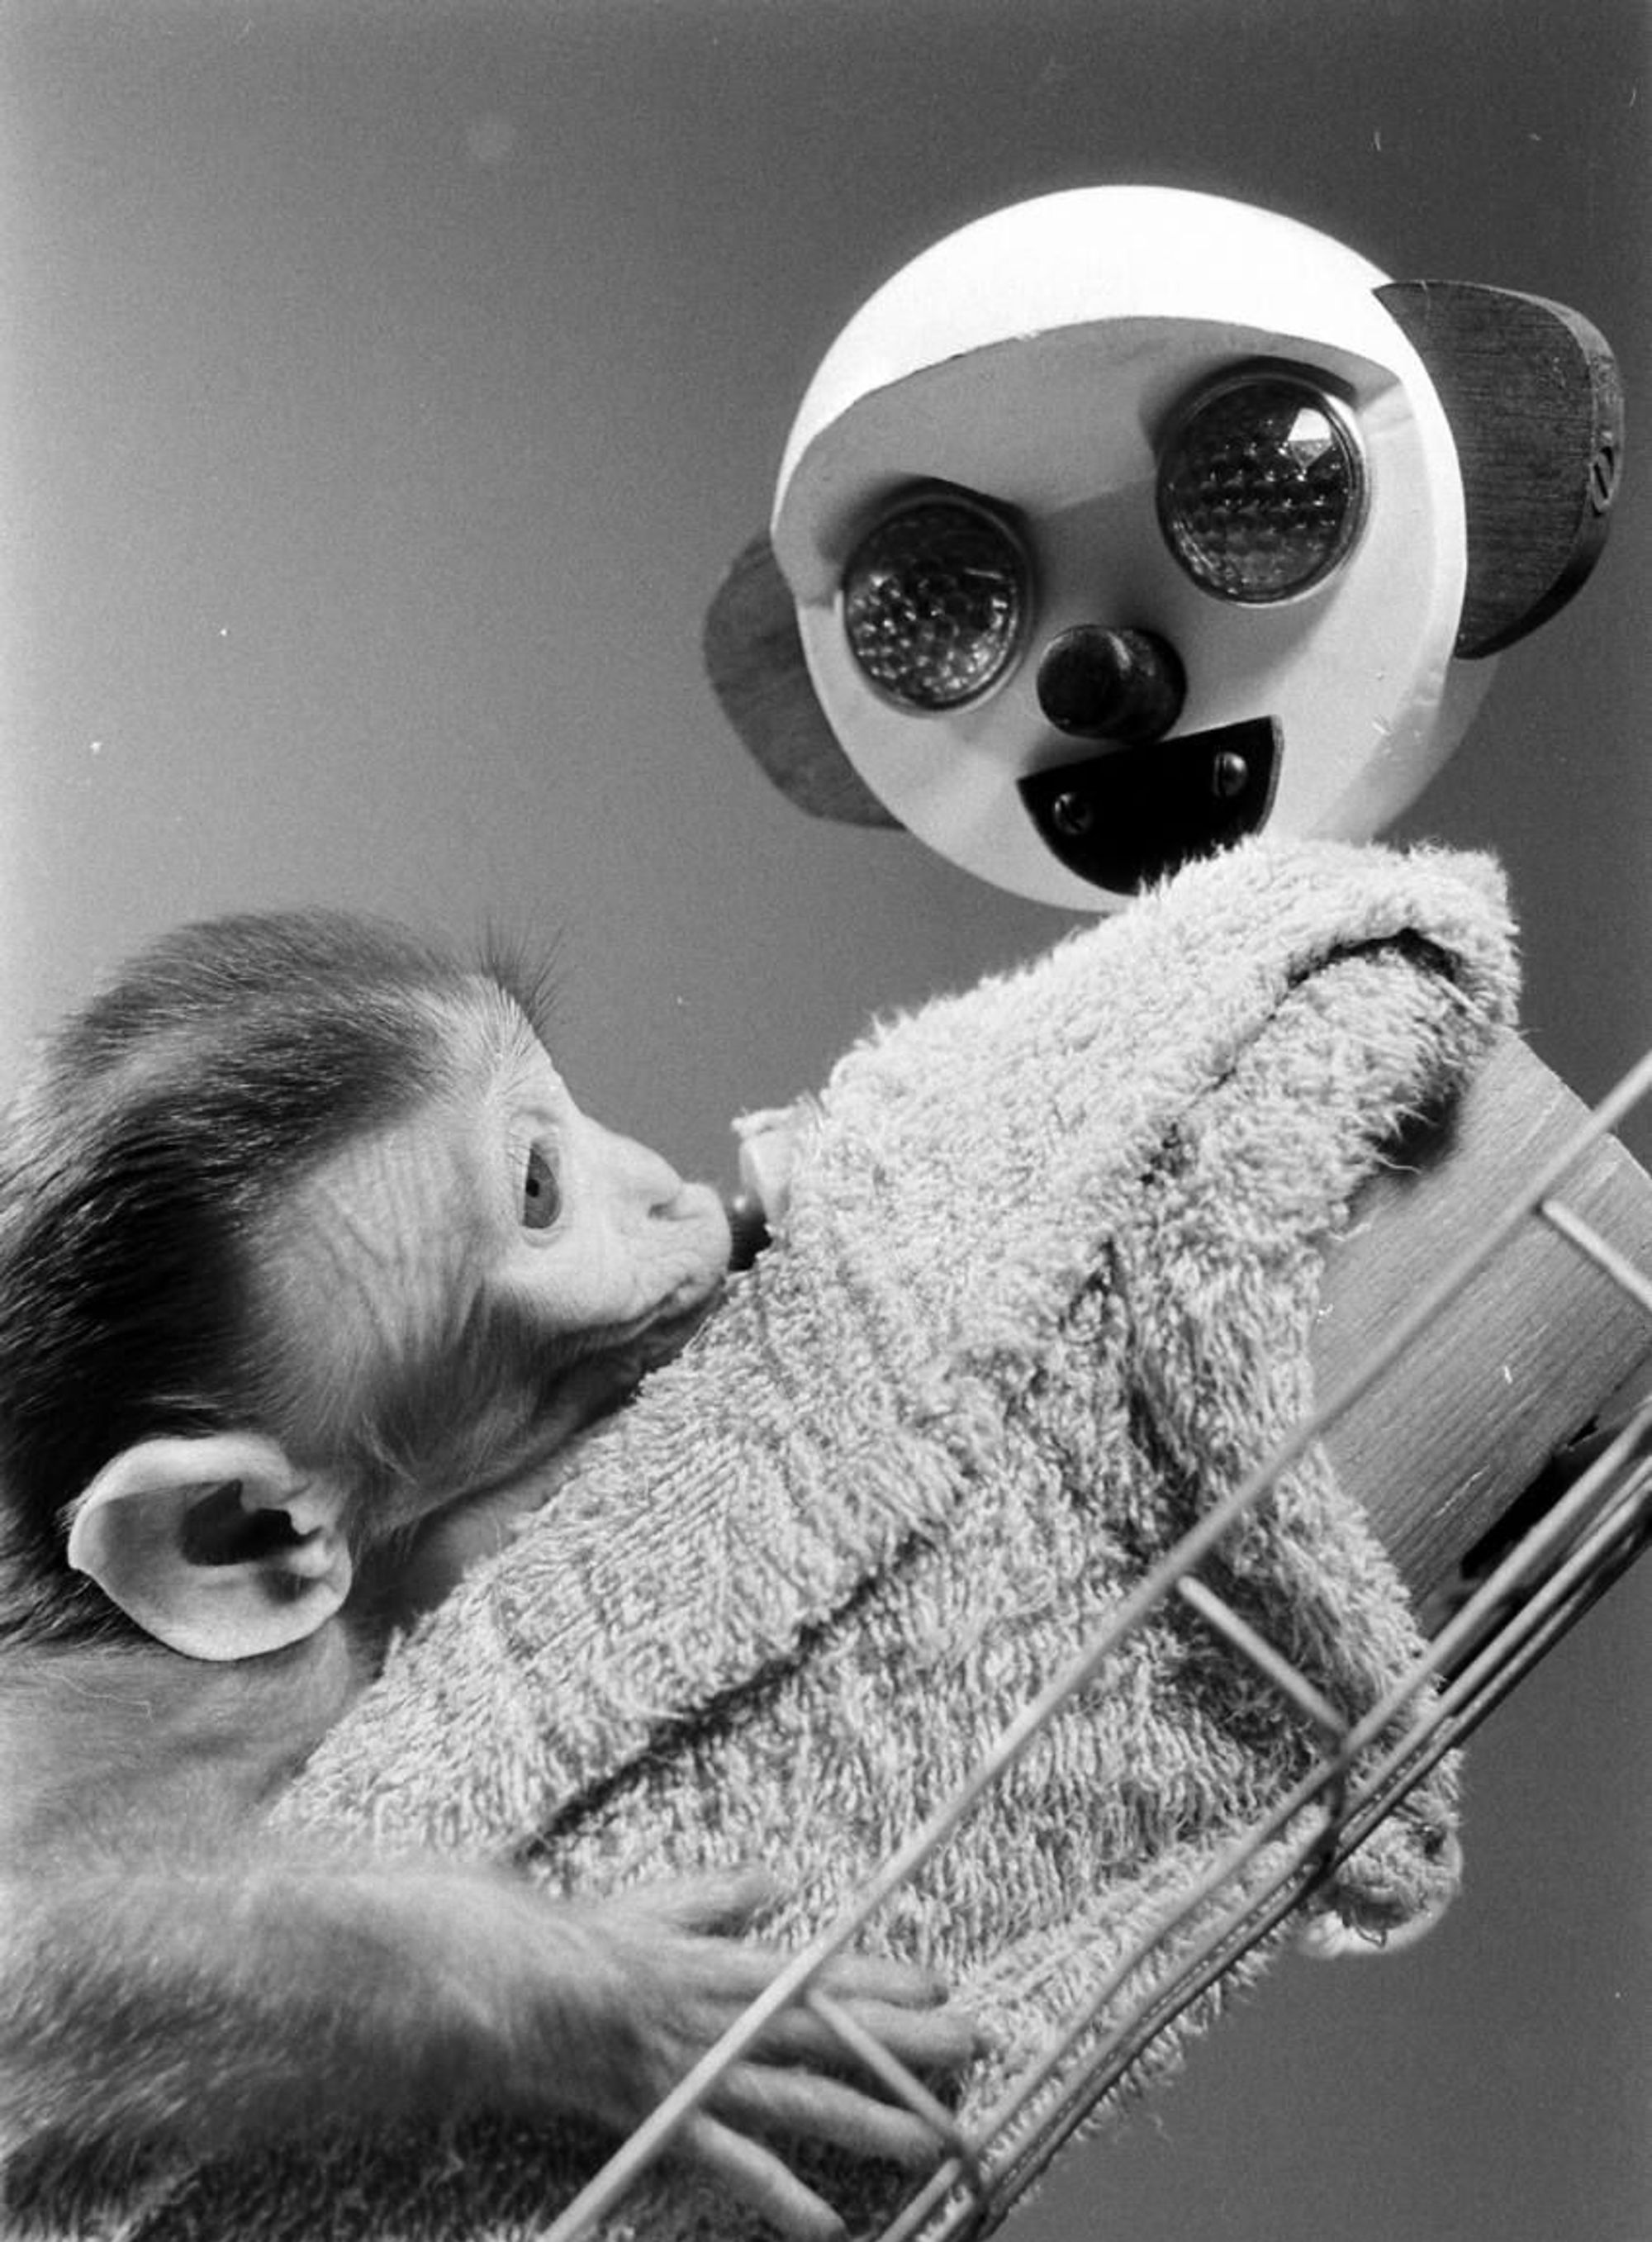 Picture of monkey clinging to a cloth surrogate, from Harlow's experiments. 